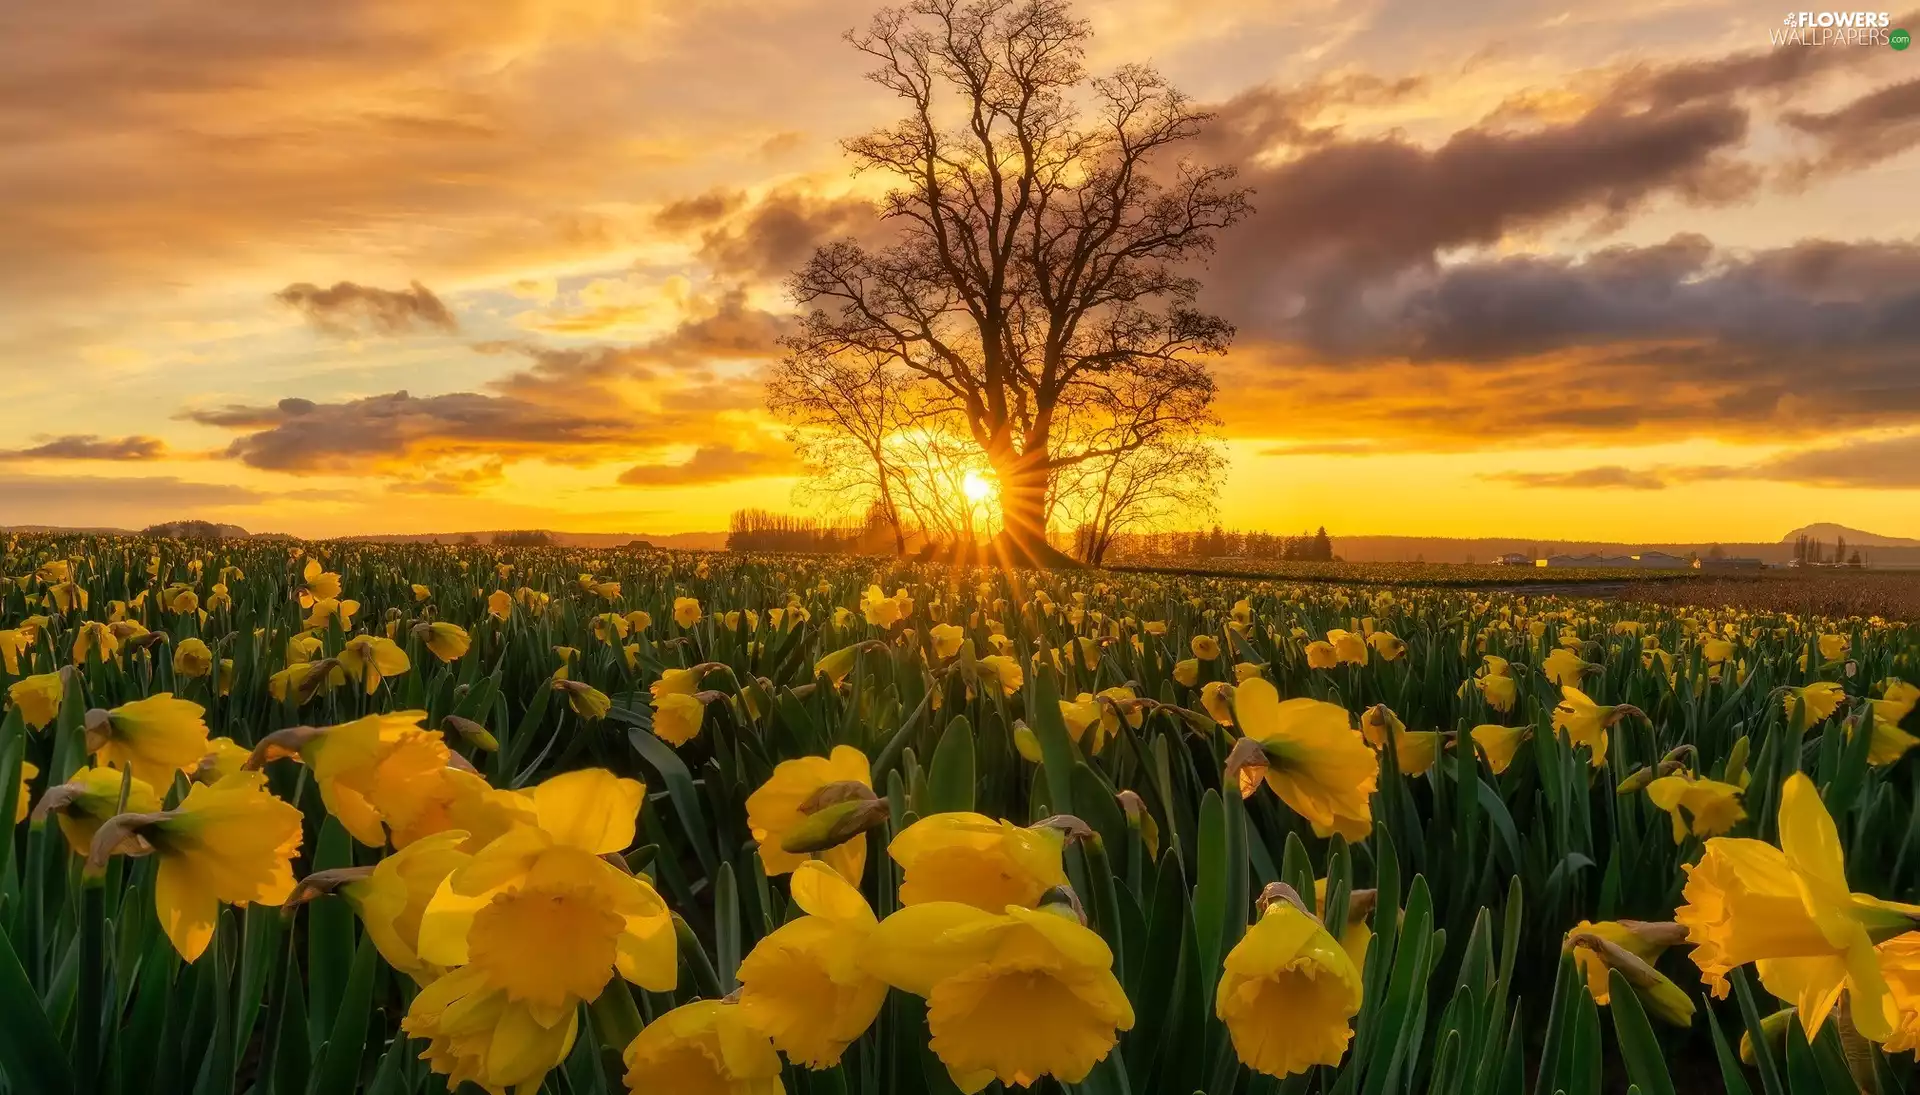 Jonquil, plantation, clouds, Great Sunsets, trees, Yellow